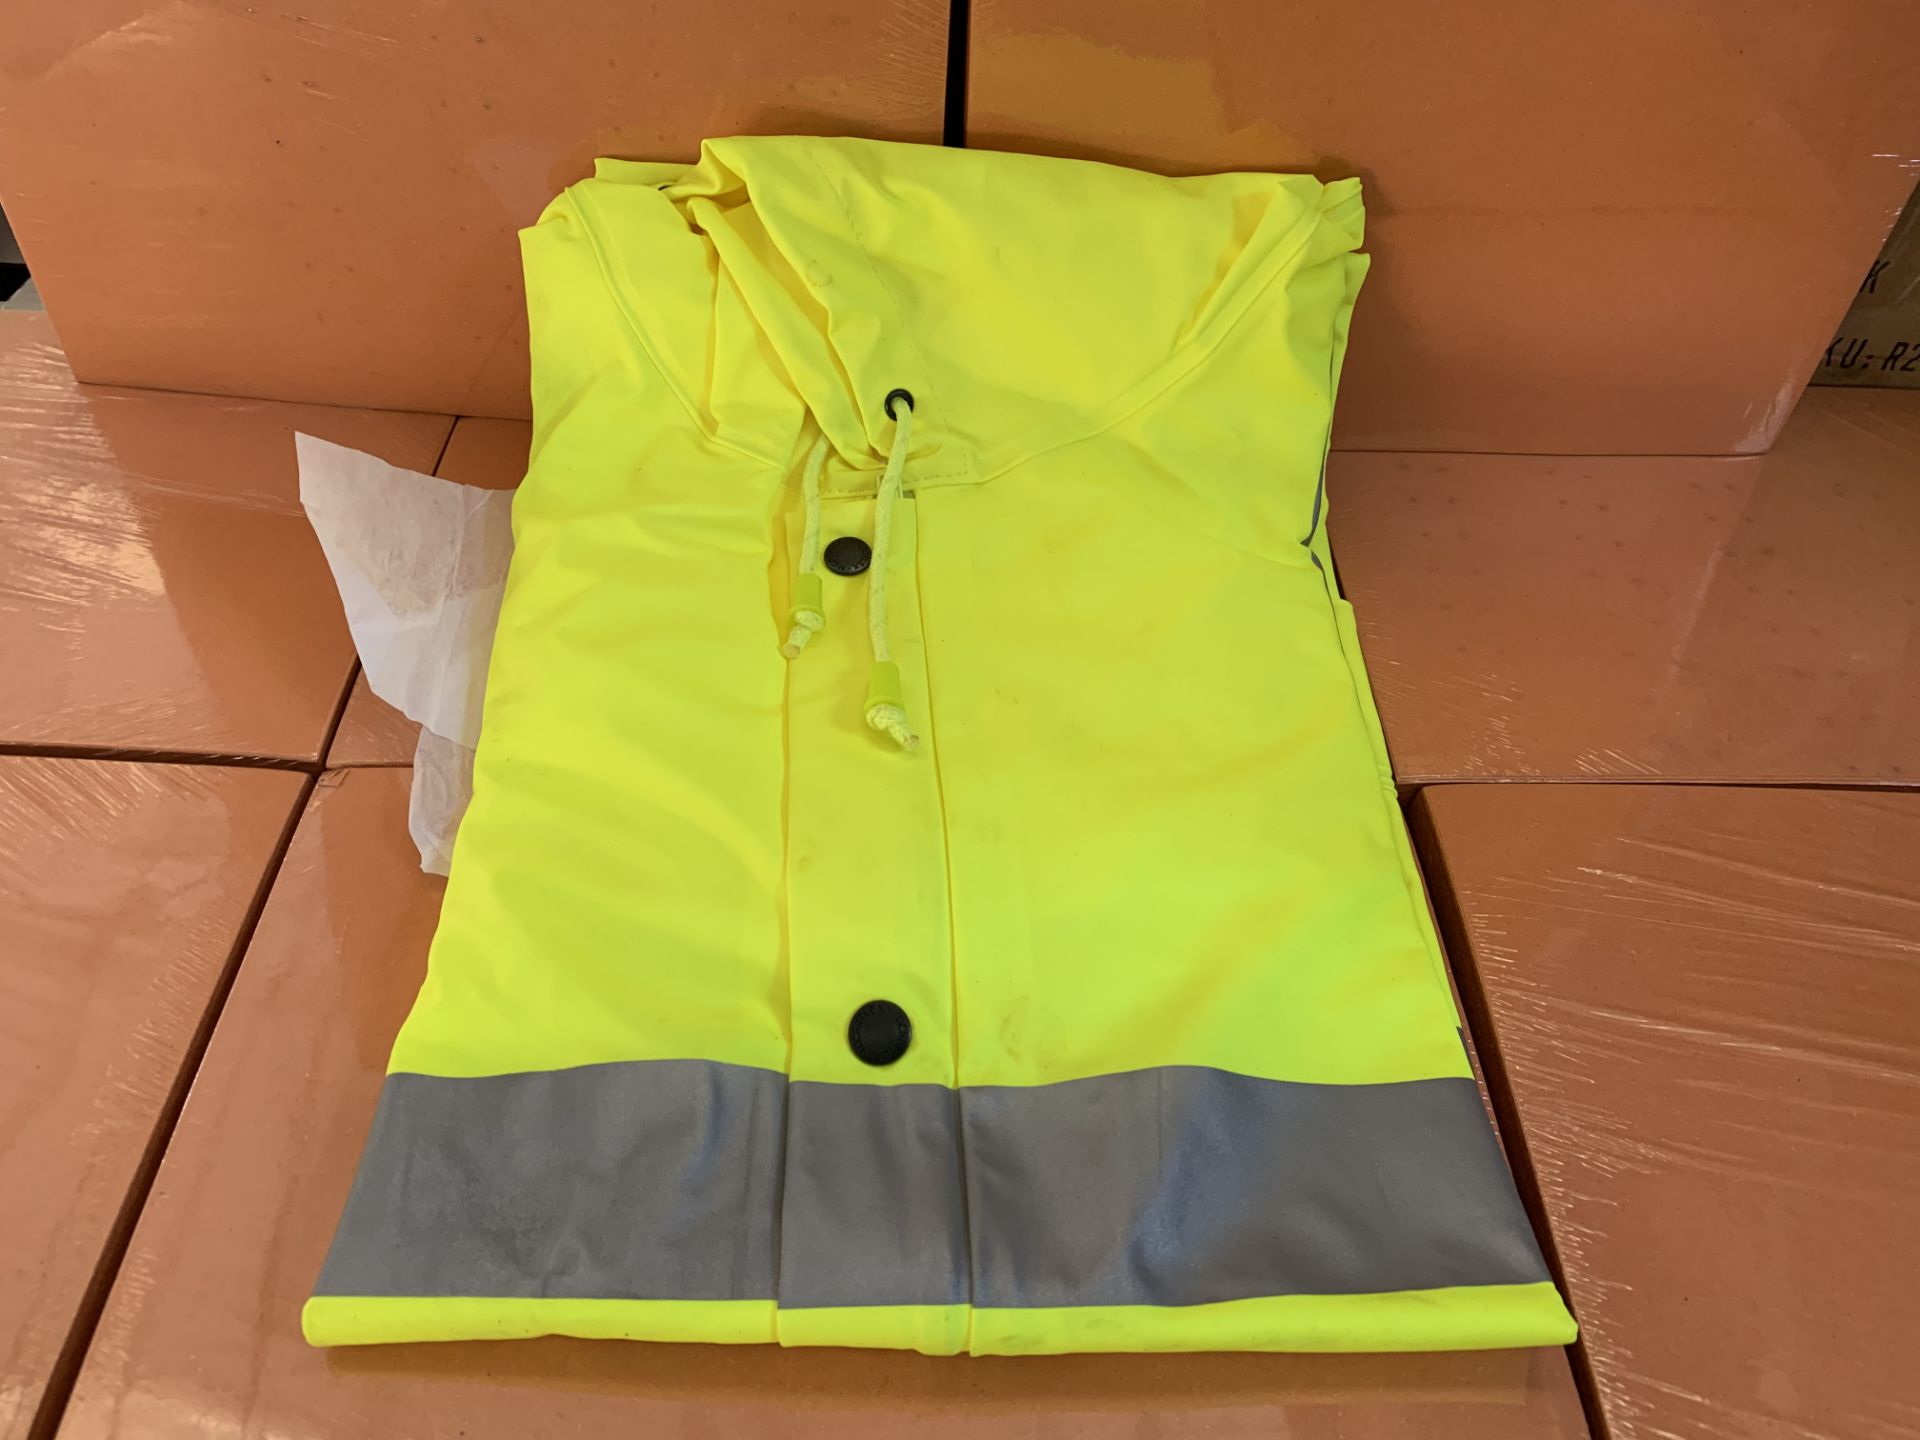 10 X HIGH VIS ALL WEATHER JACKET SIZES MAY VARY